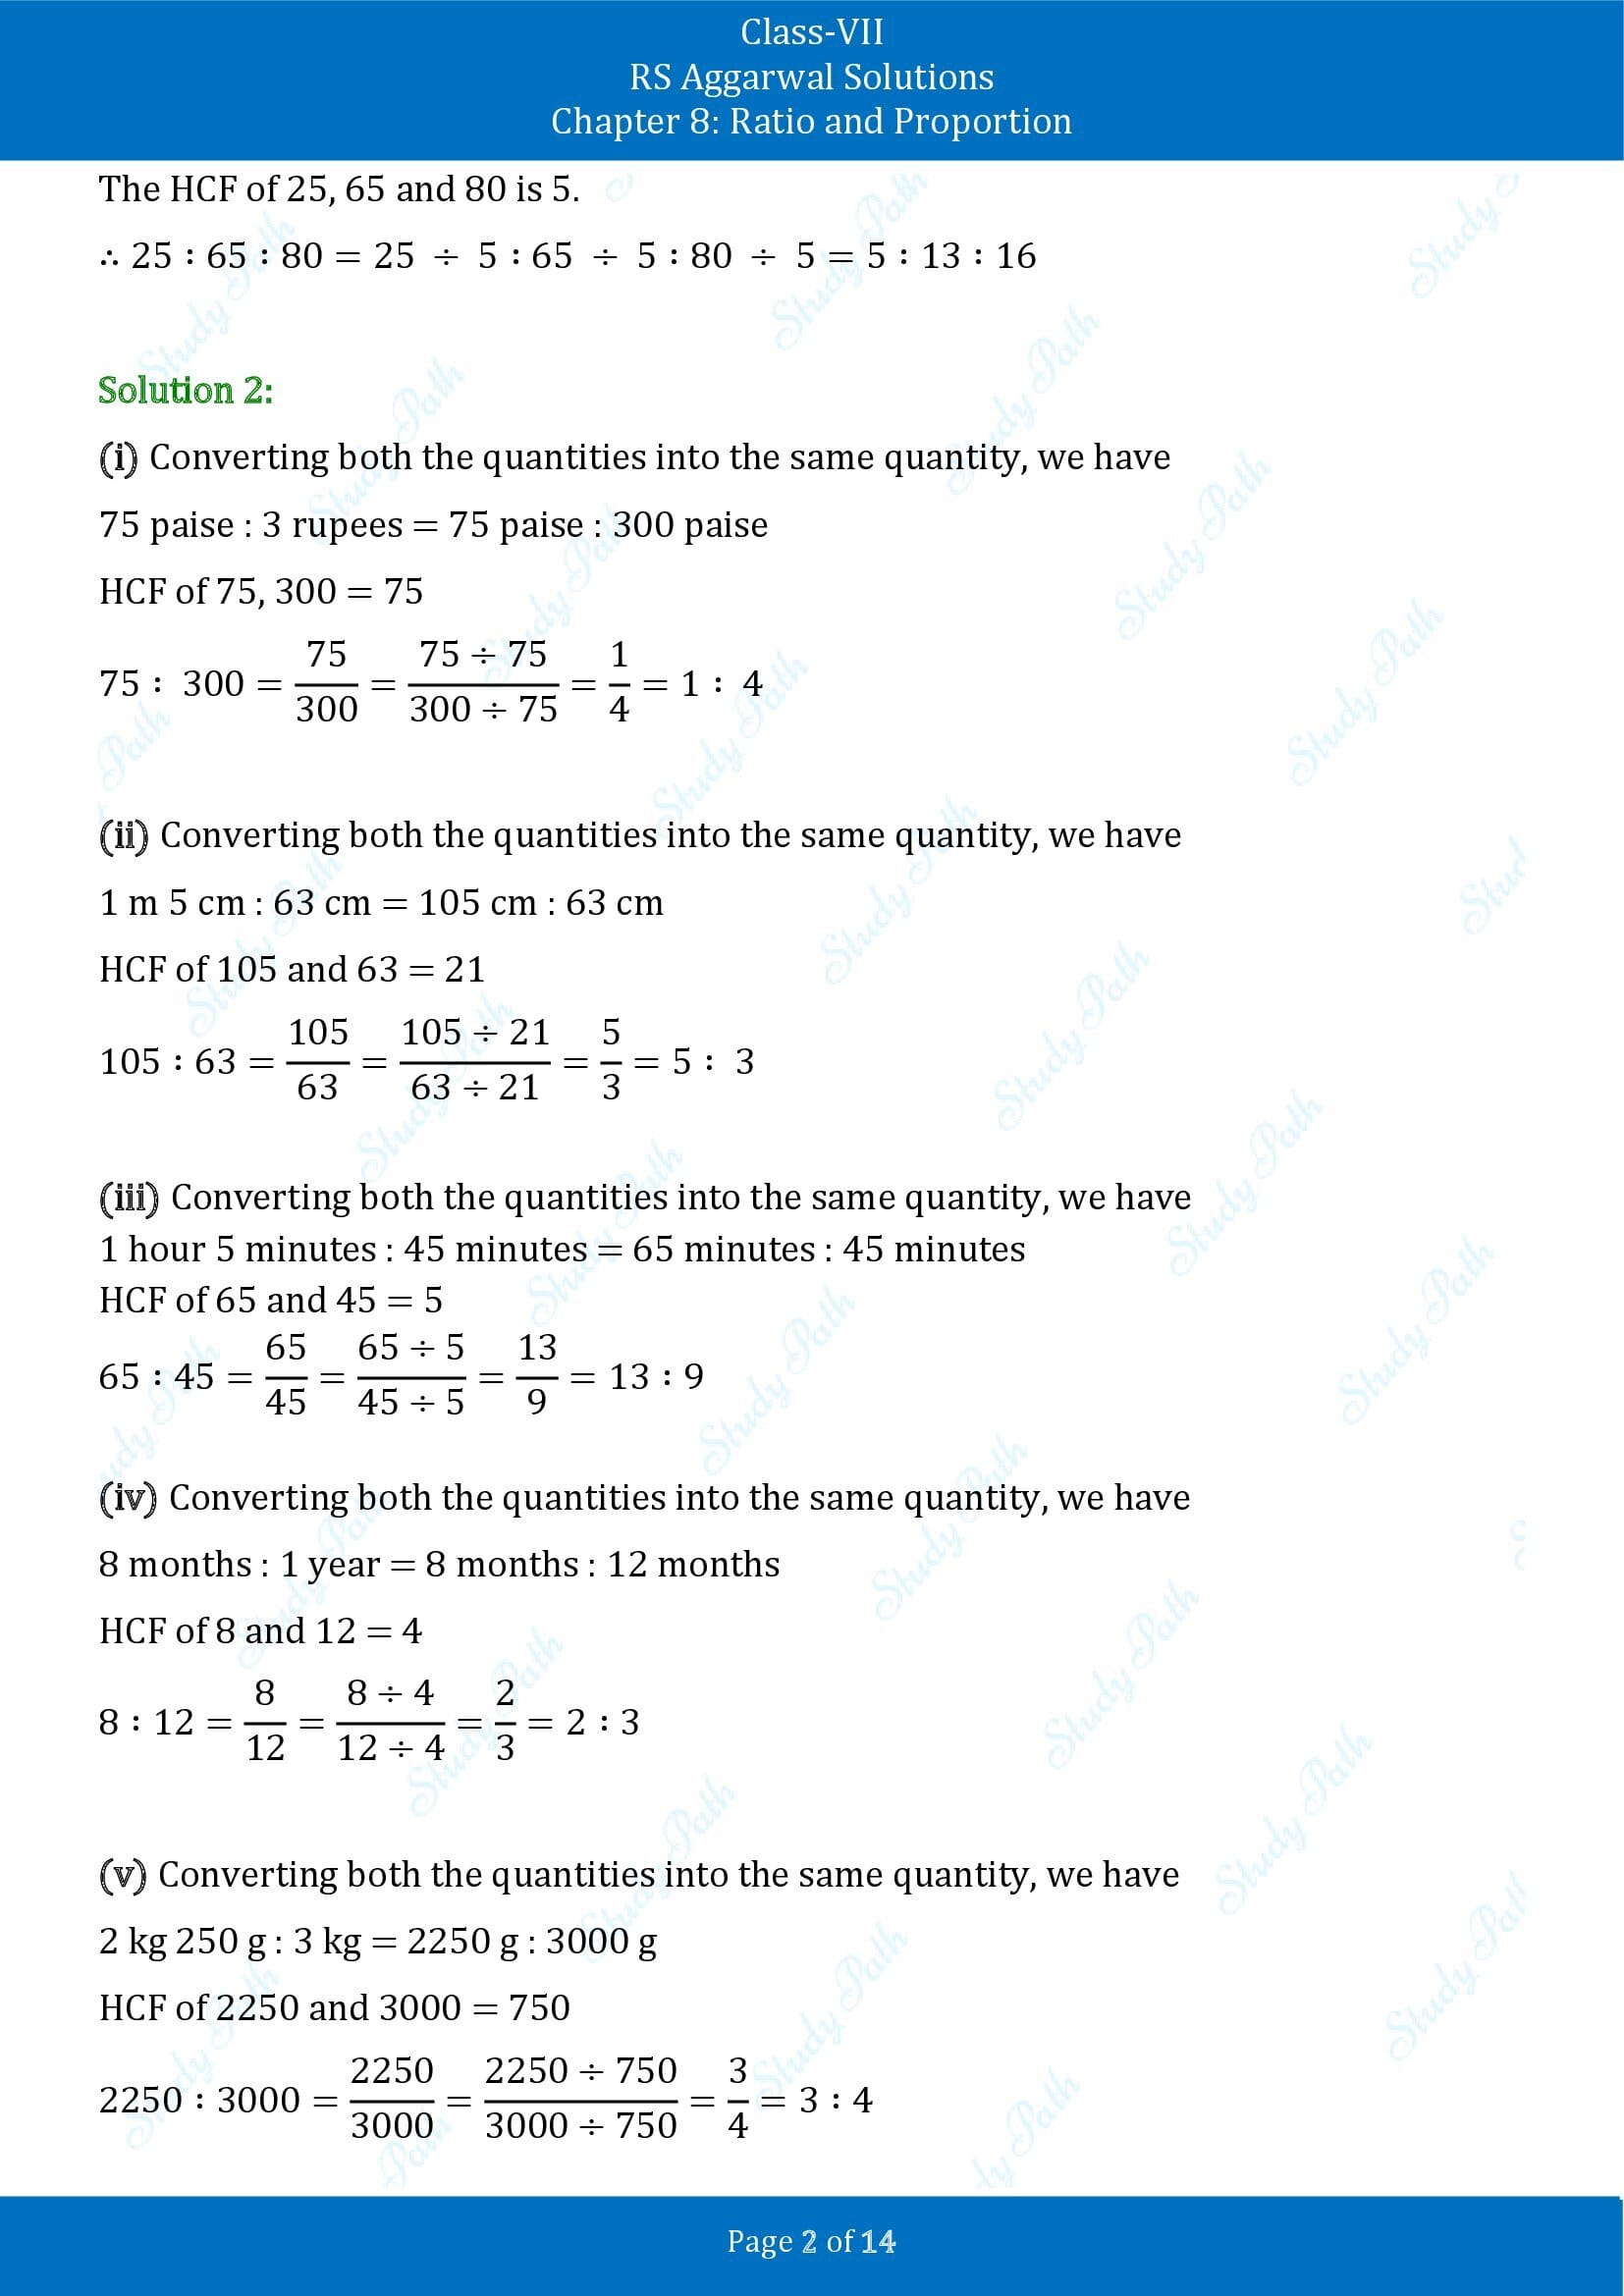 RS Aggarwal Solutions Class 7 Chapter 8 Ratio and Proportion Exercise 8A 00002